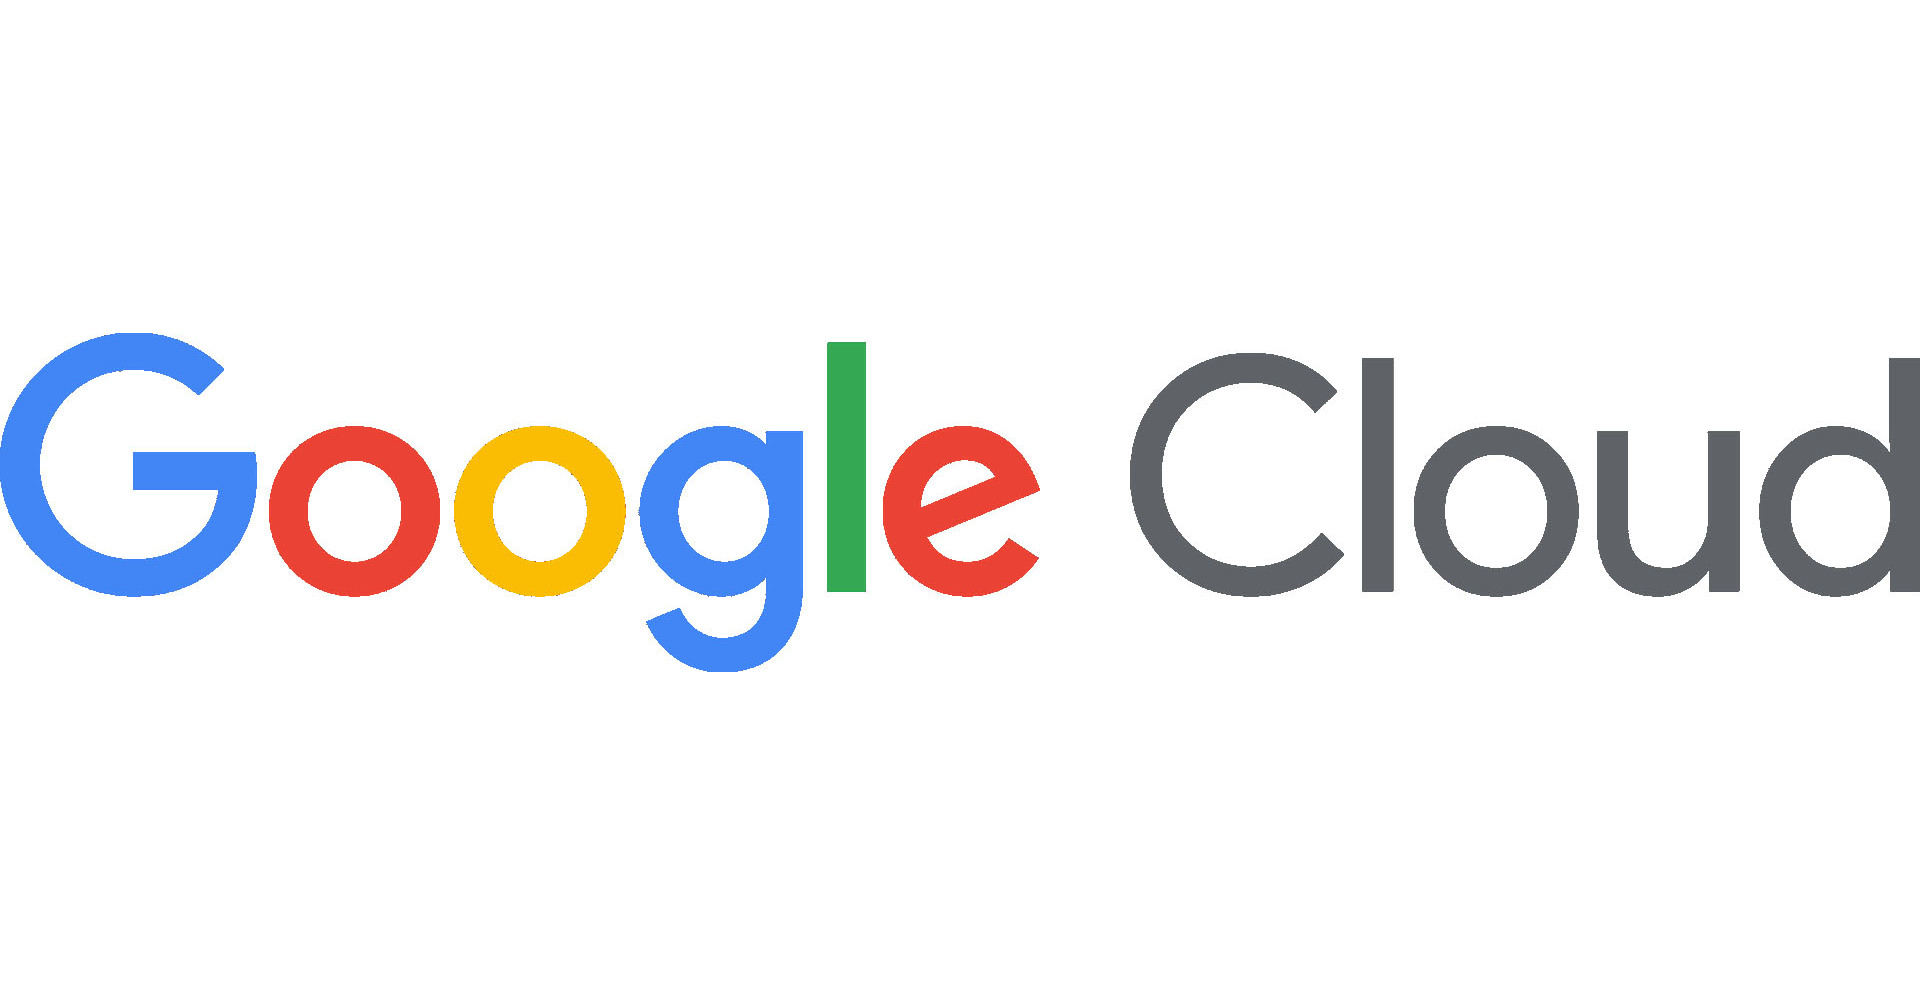 Anthropic Forges Partnership With Google Cloud to Help Deliver Reliable and Responsible AI